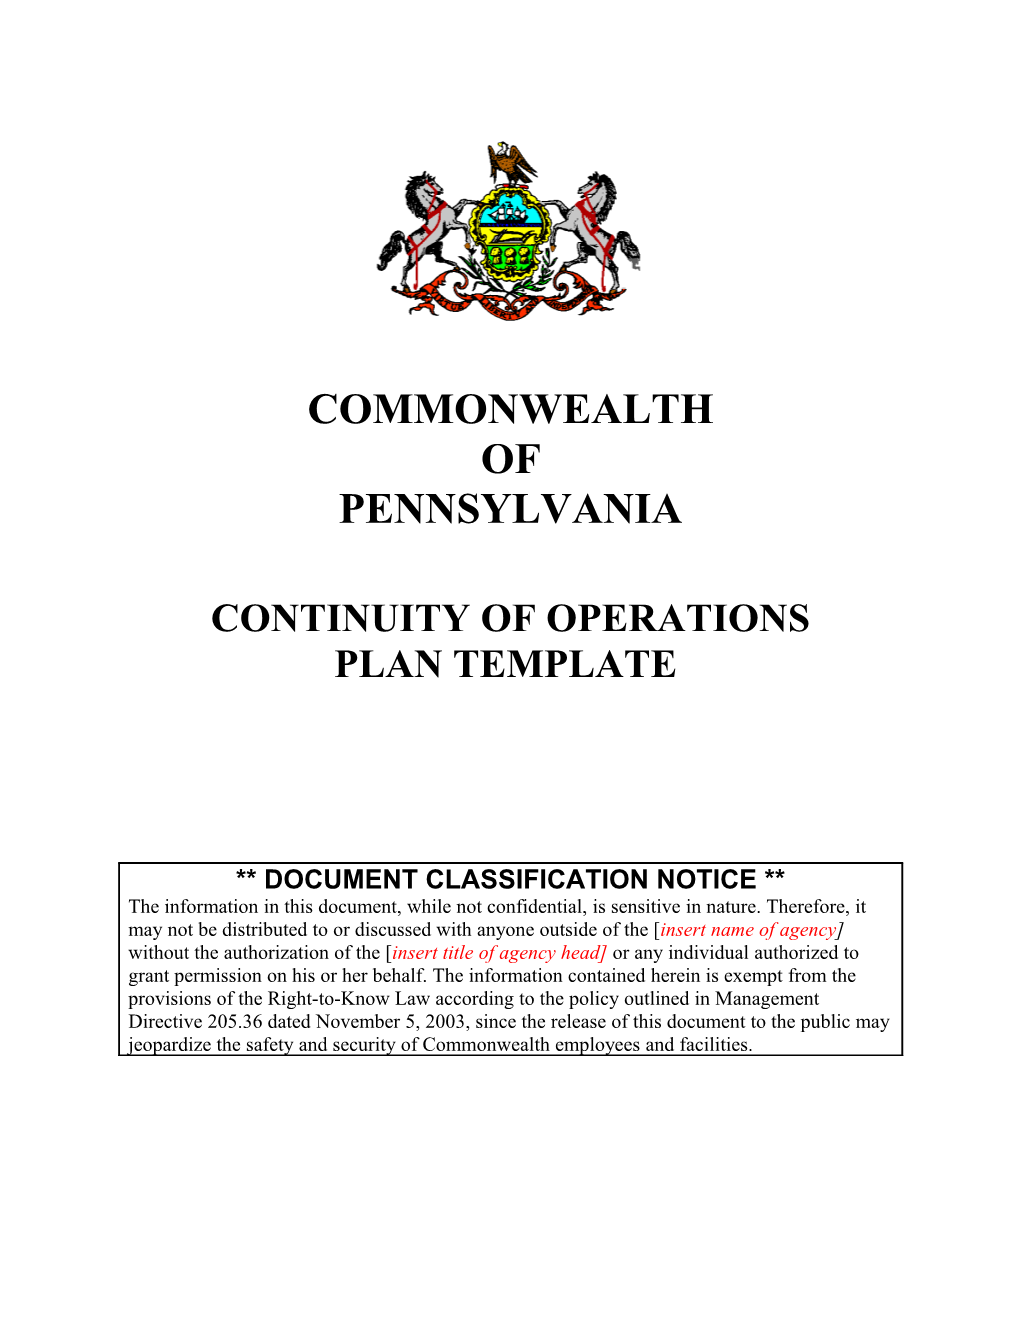 Continuity of Operations Plan 2000